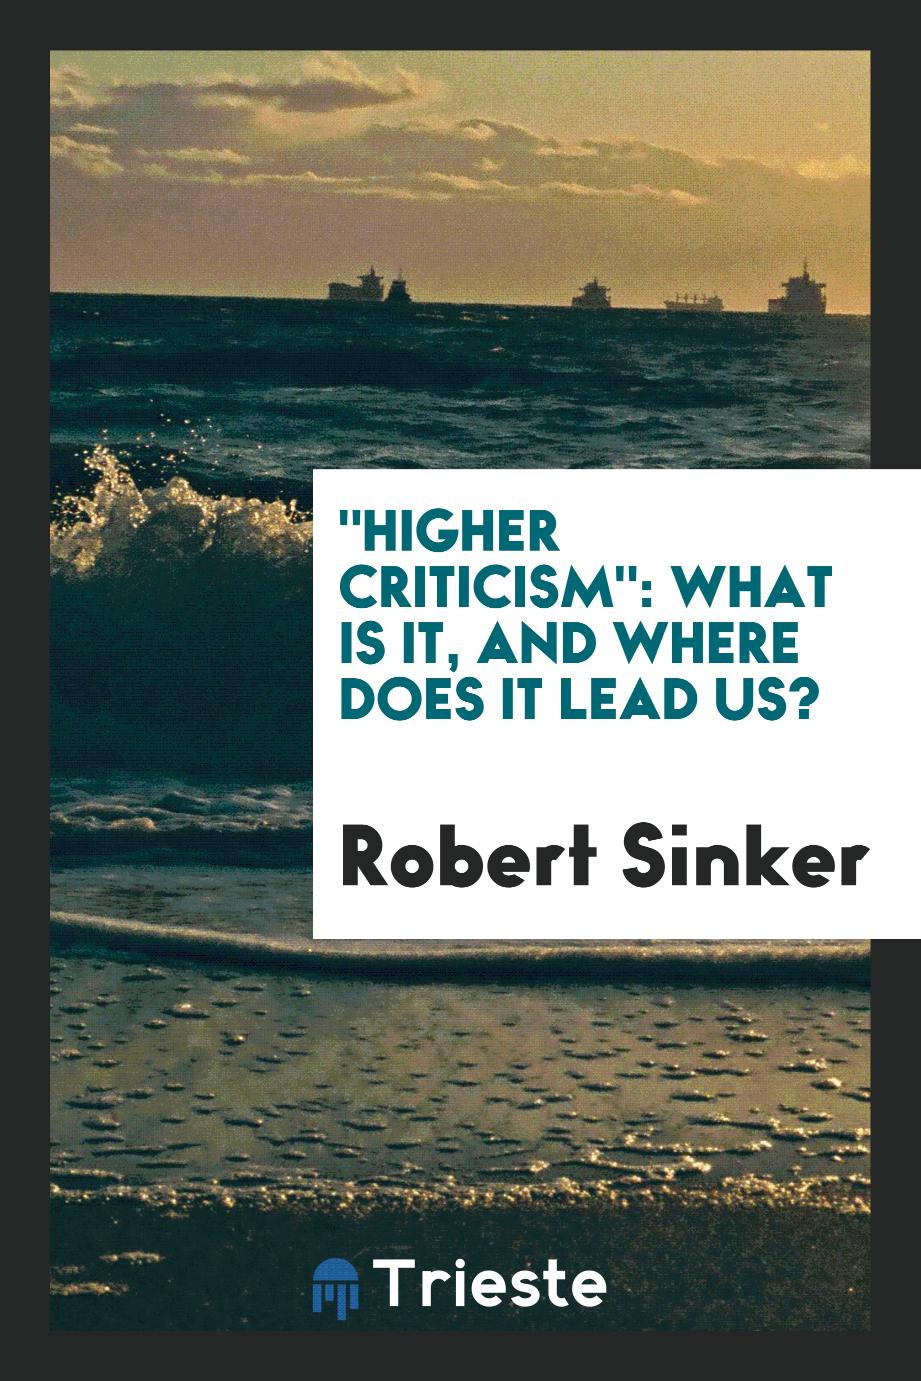 "Higher criticism": what is it, and where does it lead us?